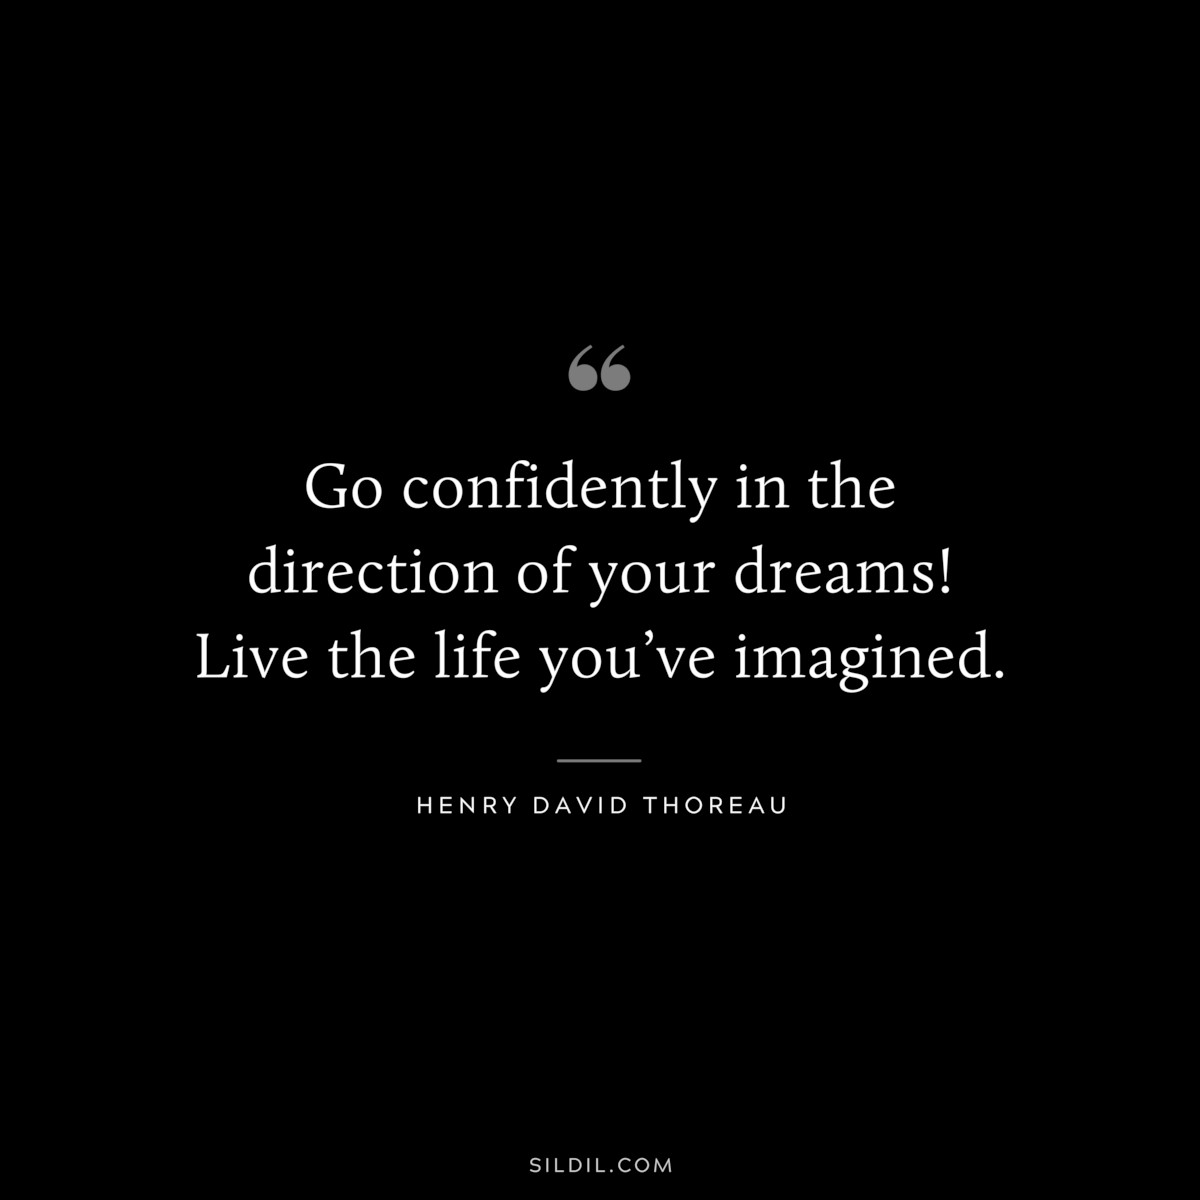 Go confidently in the direction of your dreams! Live the life you’ve imagined. — Henry David Thoreau